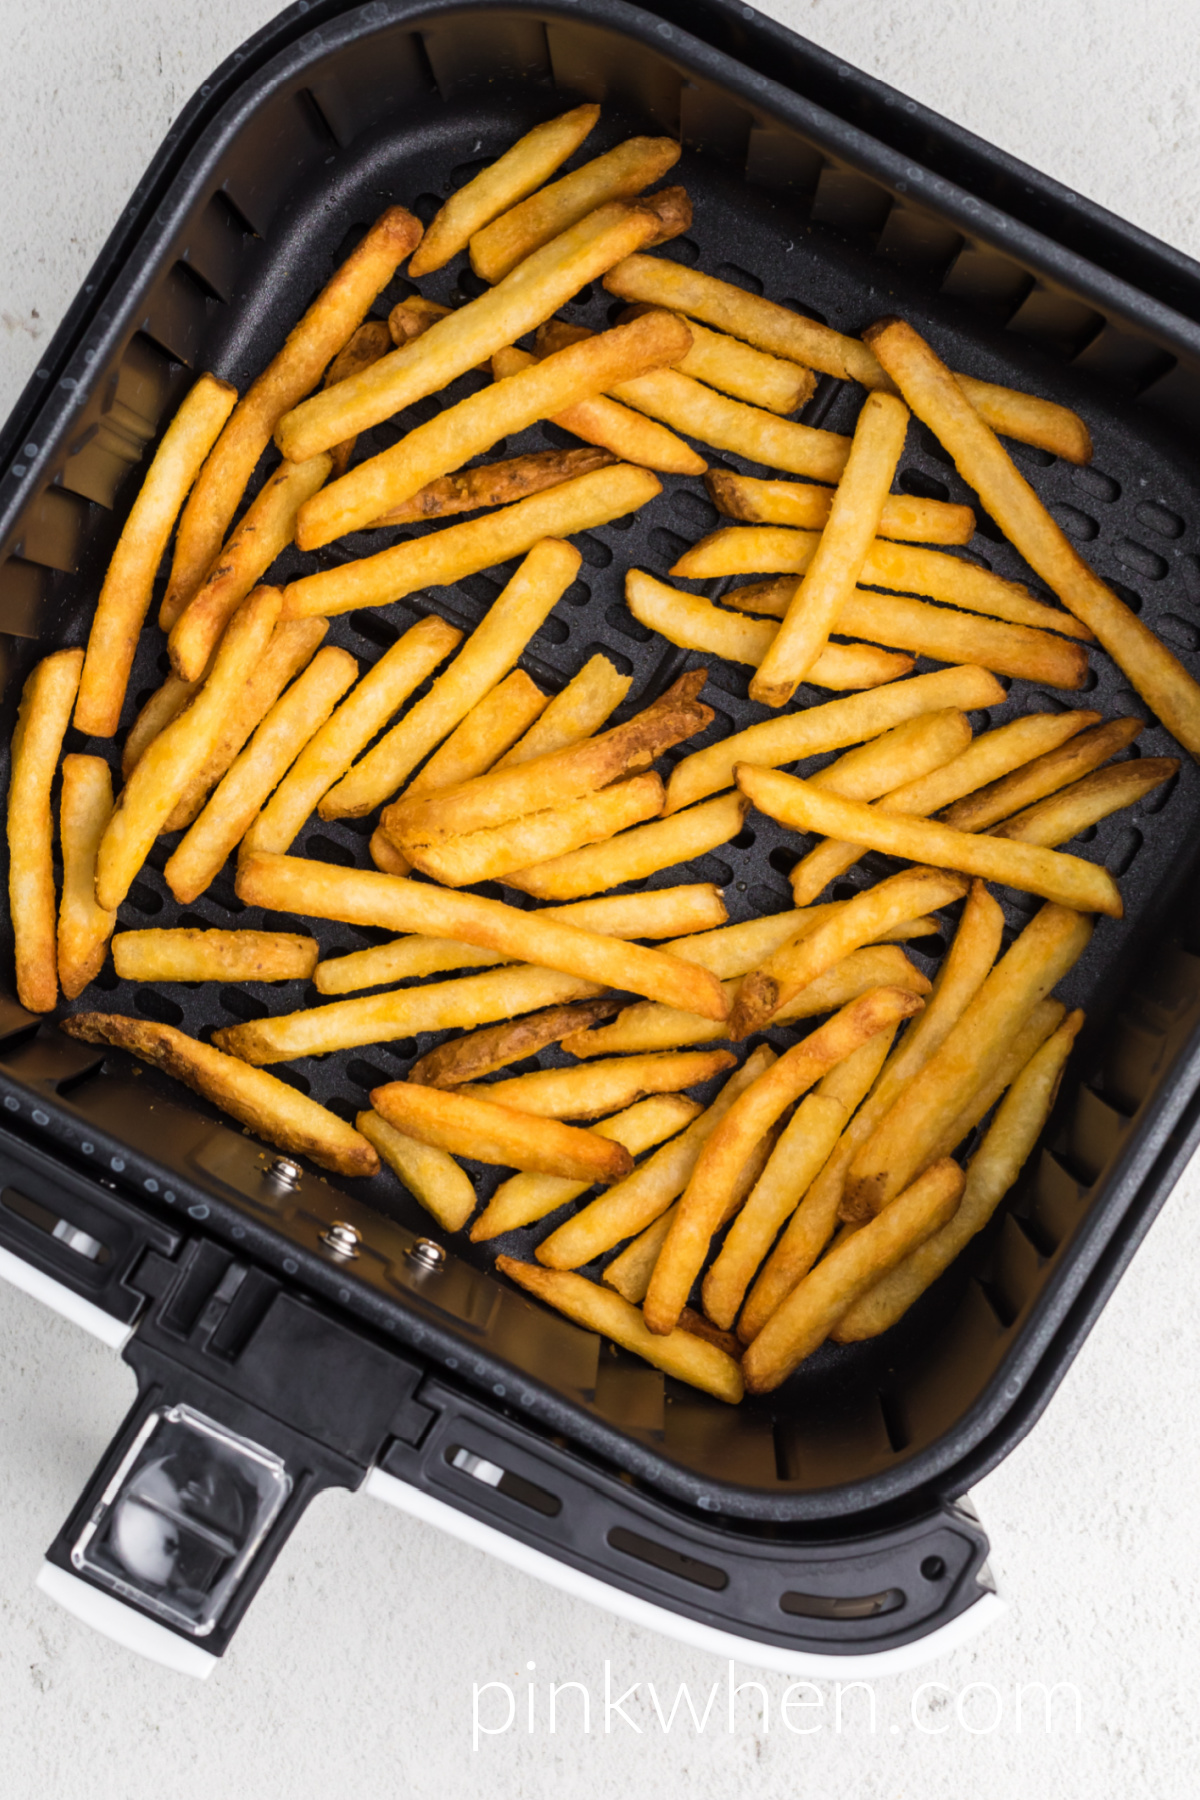 Fully cooked french fries in the basket of the air fryer.